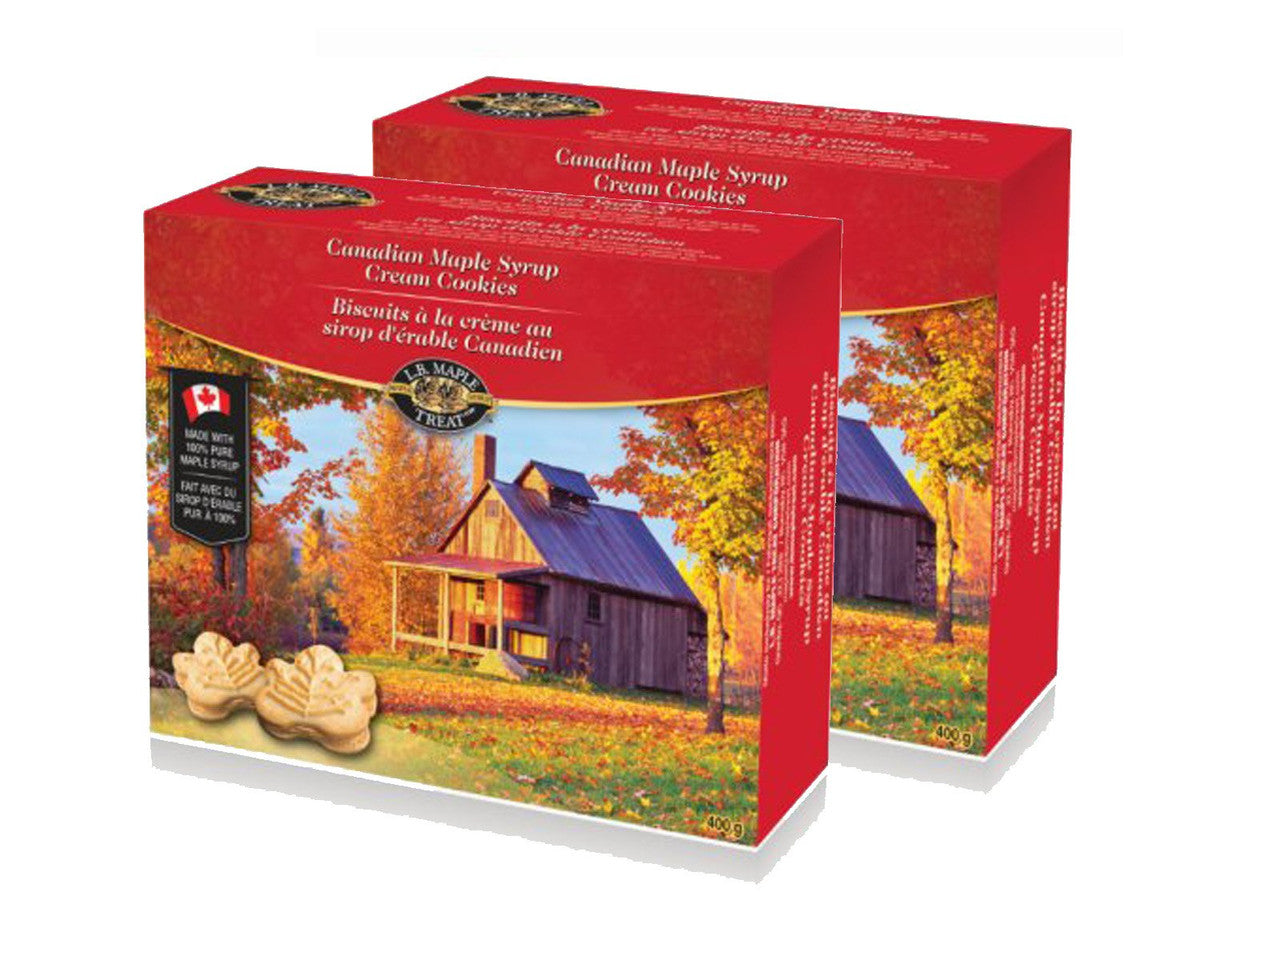 LB Canadian Maple Leaf Sugar Cream / Creme Snack Cookies (2 Pack) Candy Treat 400Grams 14 Ounce